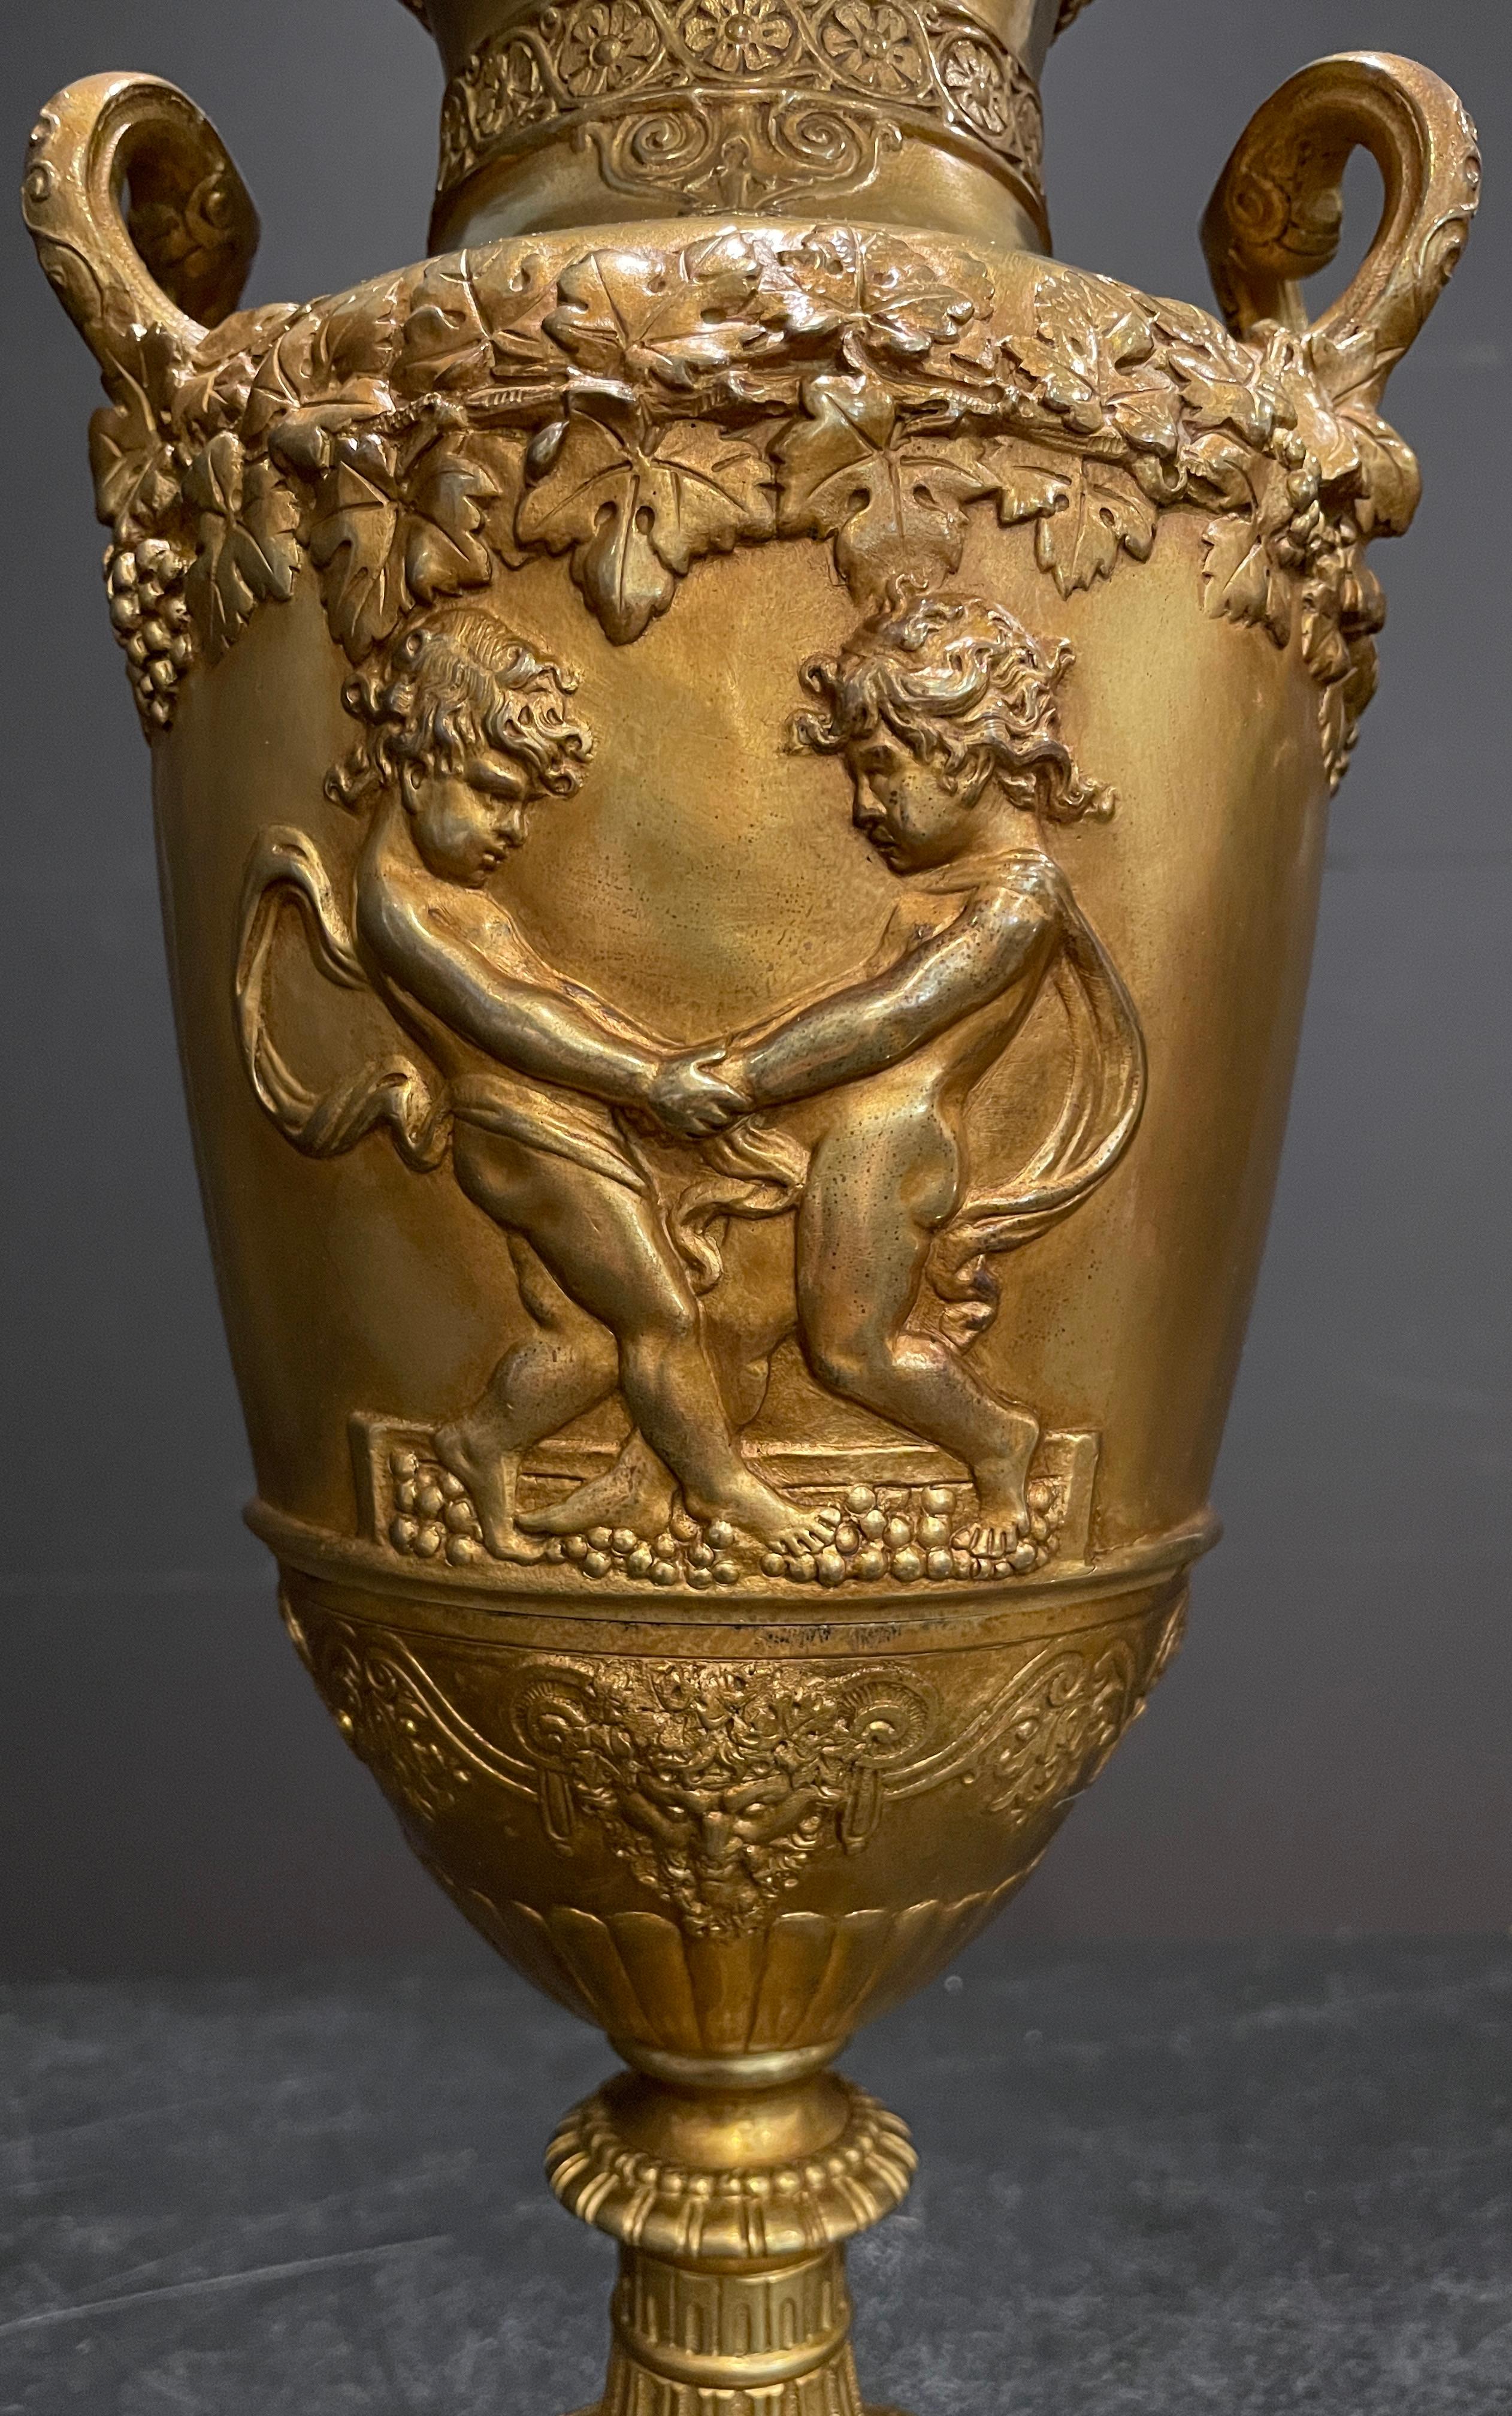 Pair 19th century French gilt bronze urns mounted as lamps. Modeled after Clodion in the Neoclassical style with grape vines, harvesting children and Bacchus masks. Mounted on green marble bases.
21